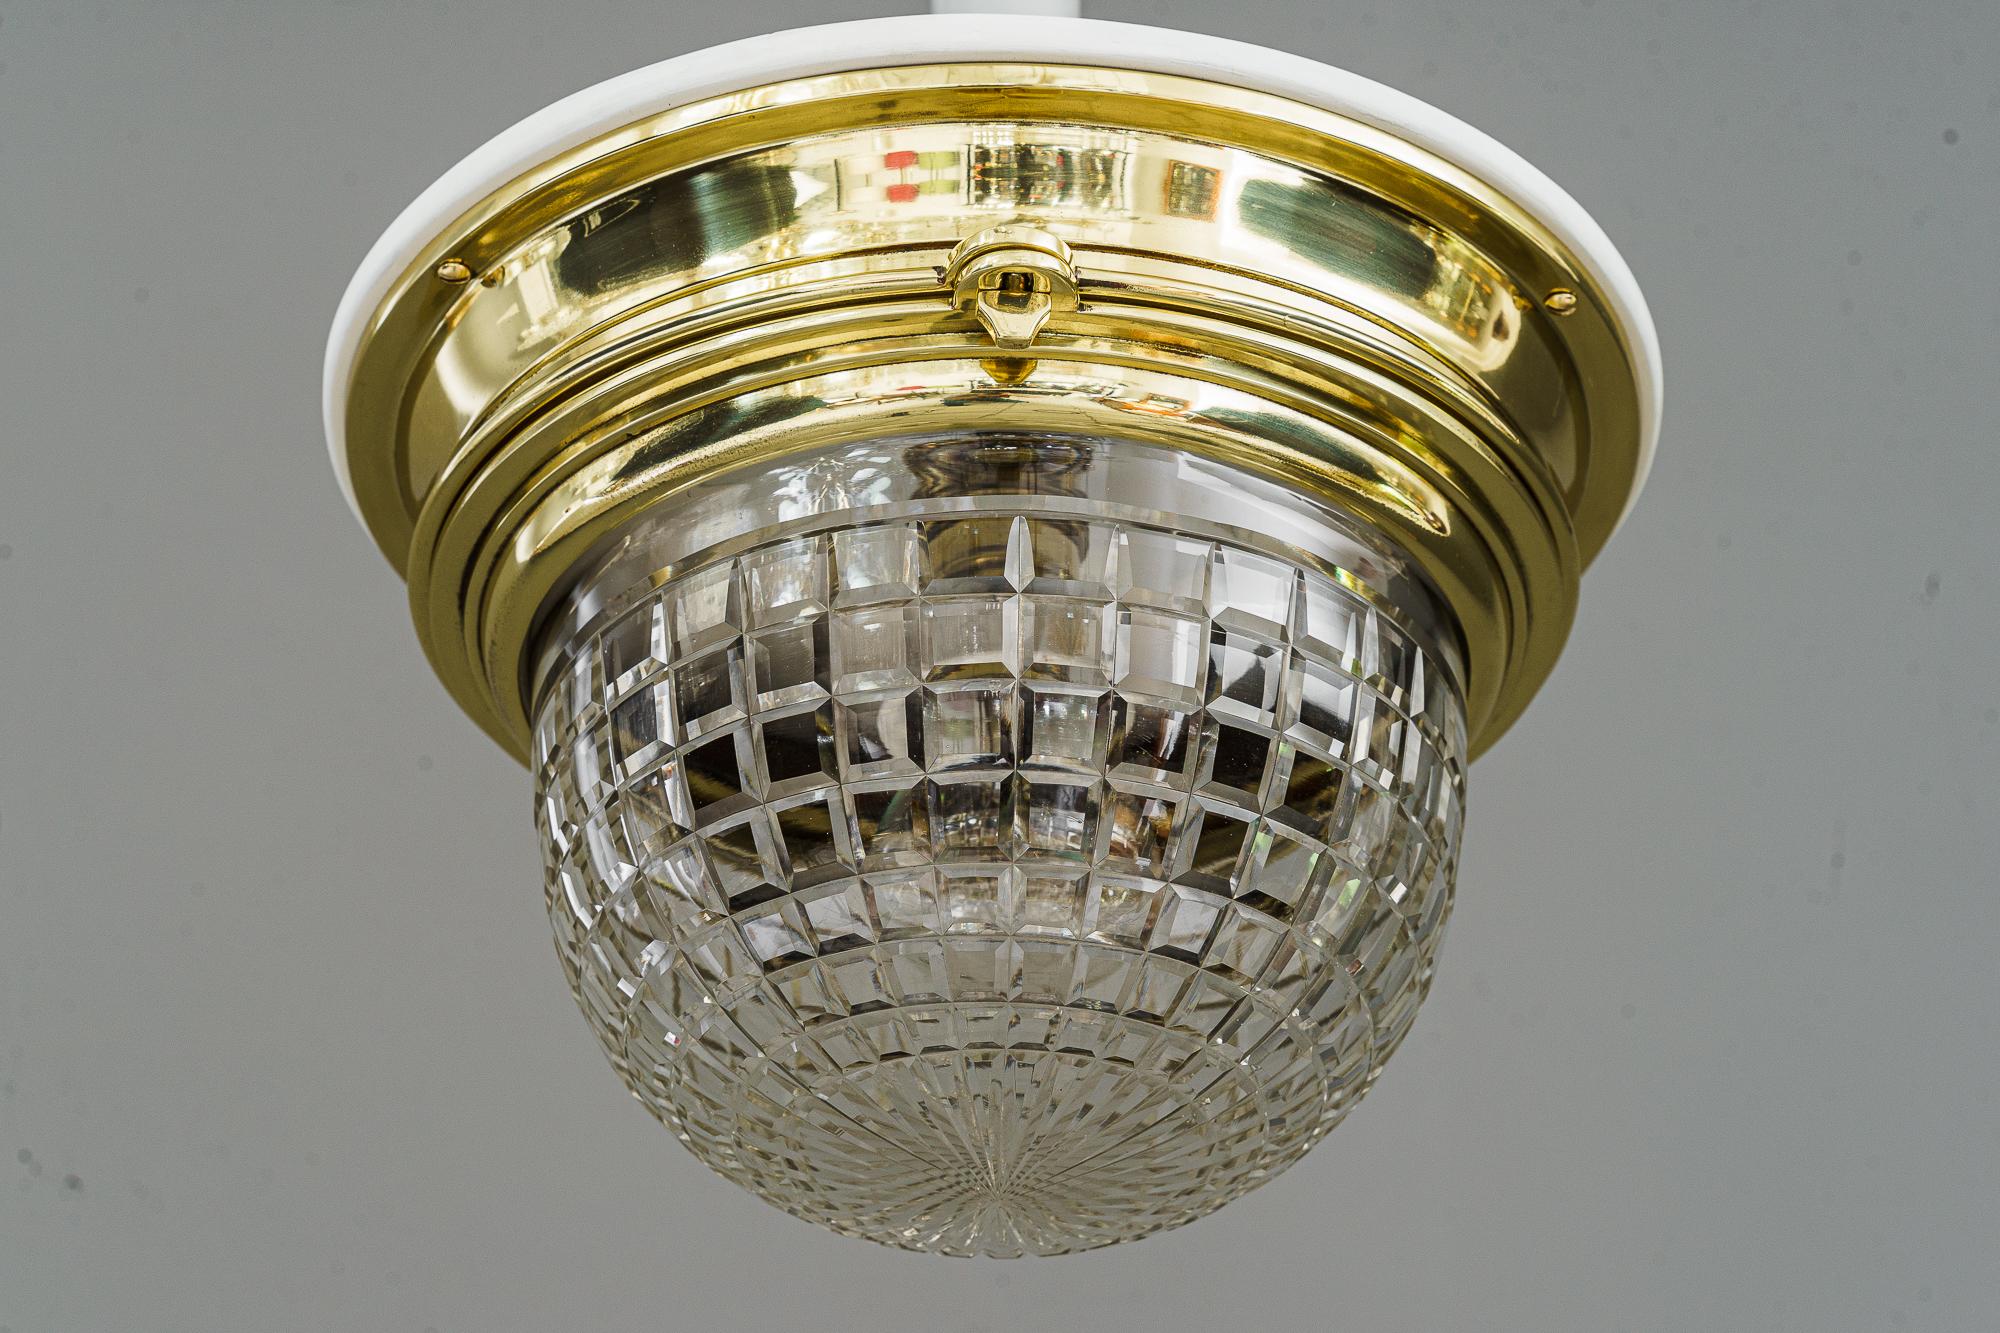 Art Deco Ceiling lamp with cut glass shade vienna around 1920s 
The glass shade can be opened for bulb changing
Polished and stove enameled brass parts
White wood plate on top ( painted )
High quality ceiling lamp.